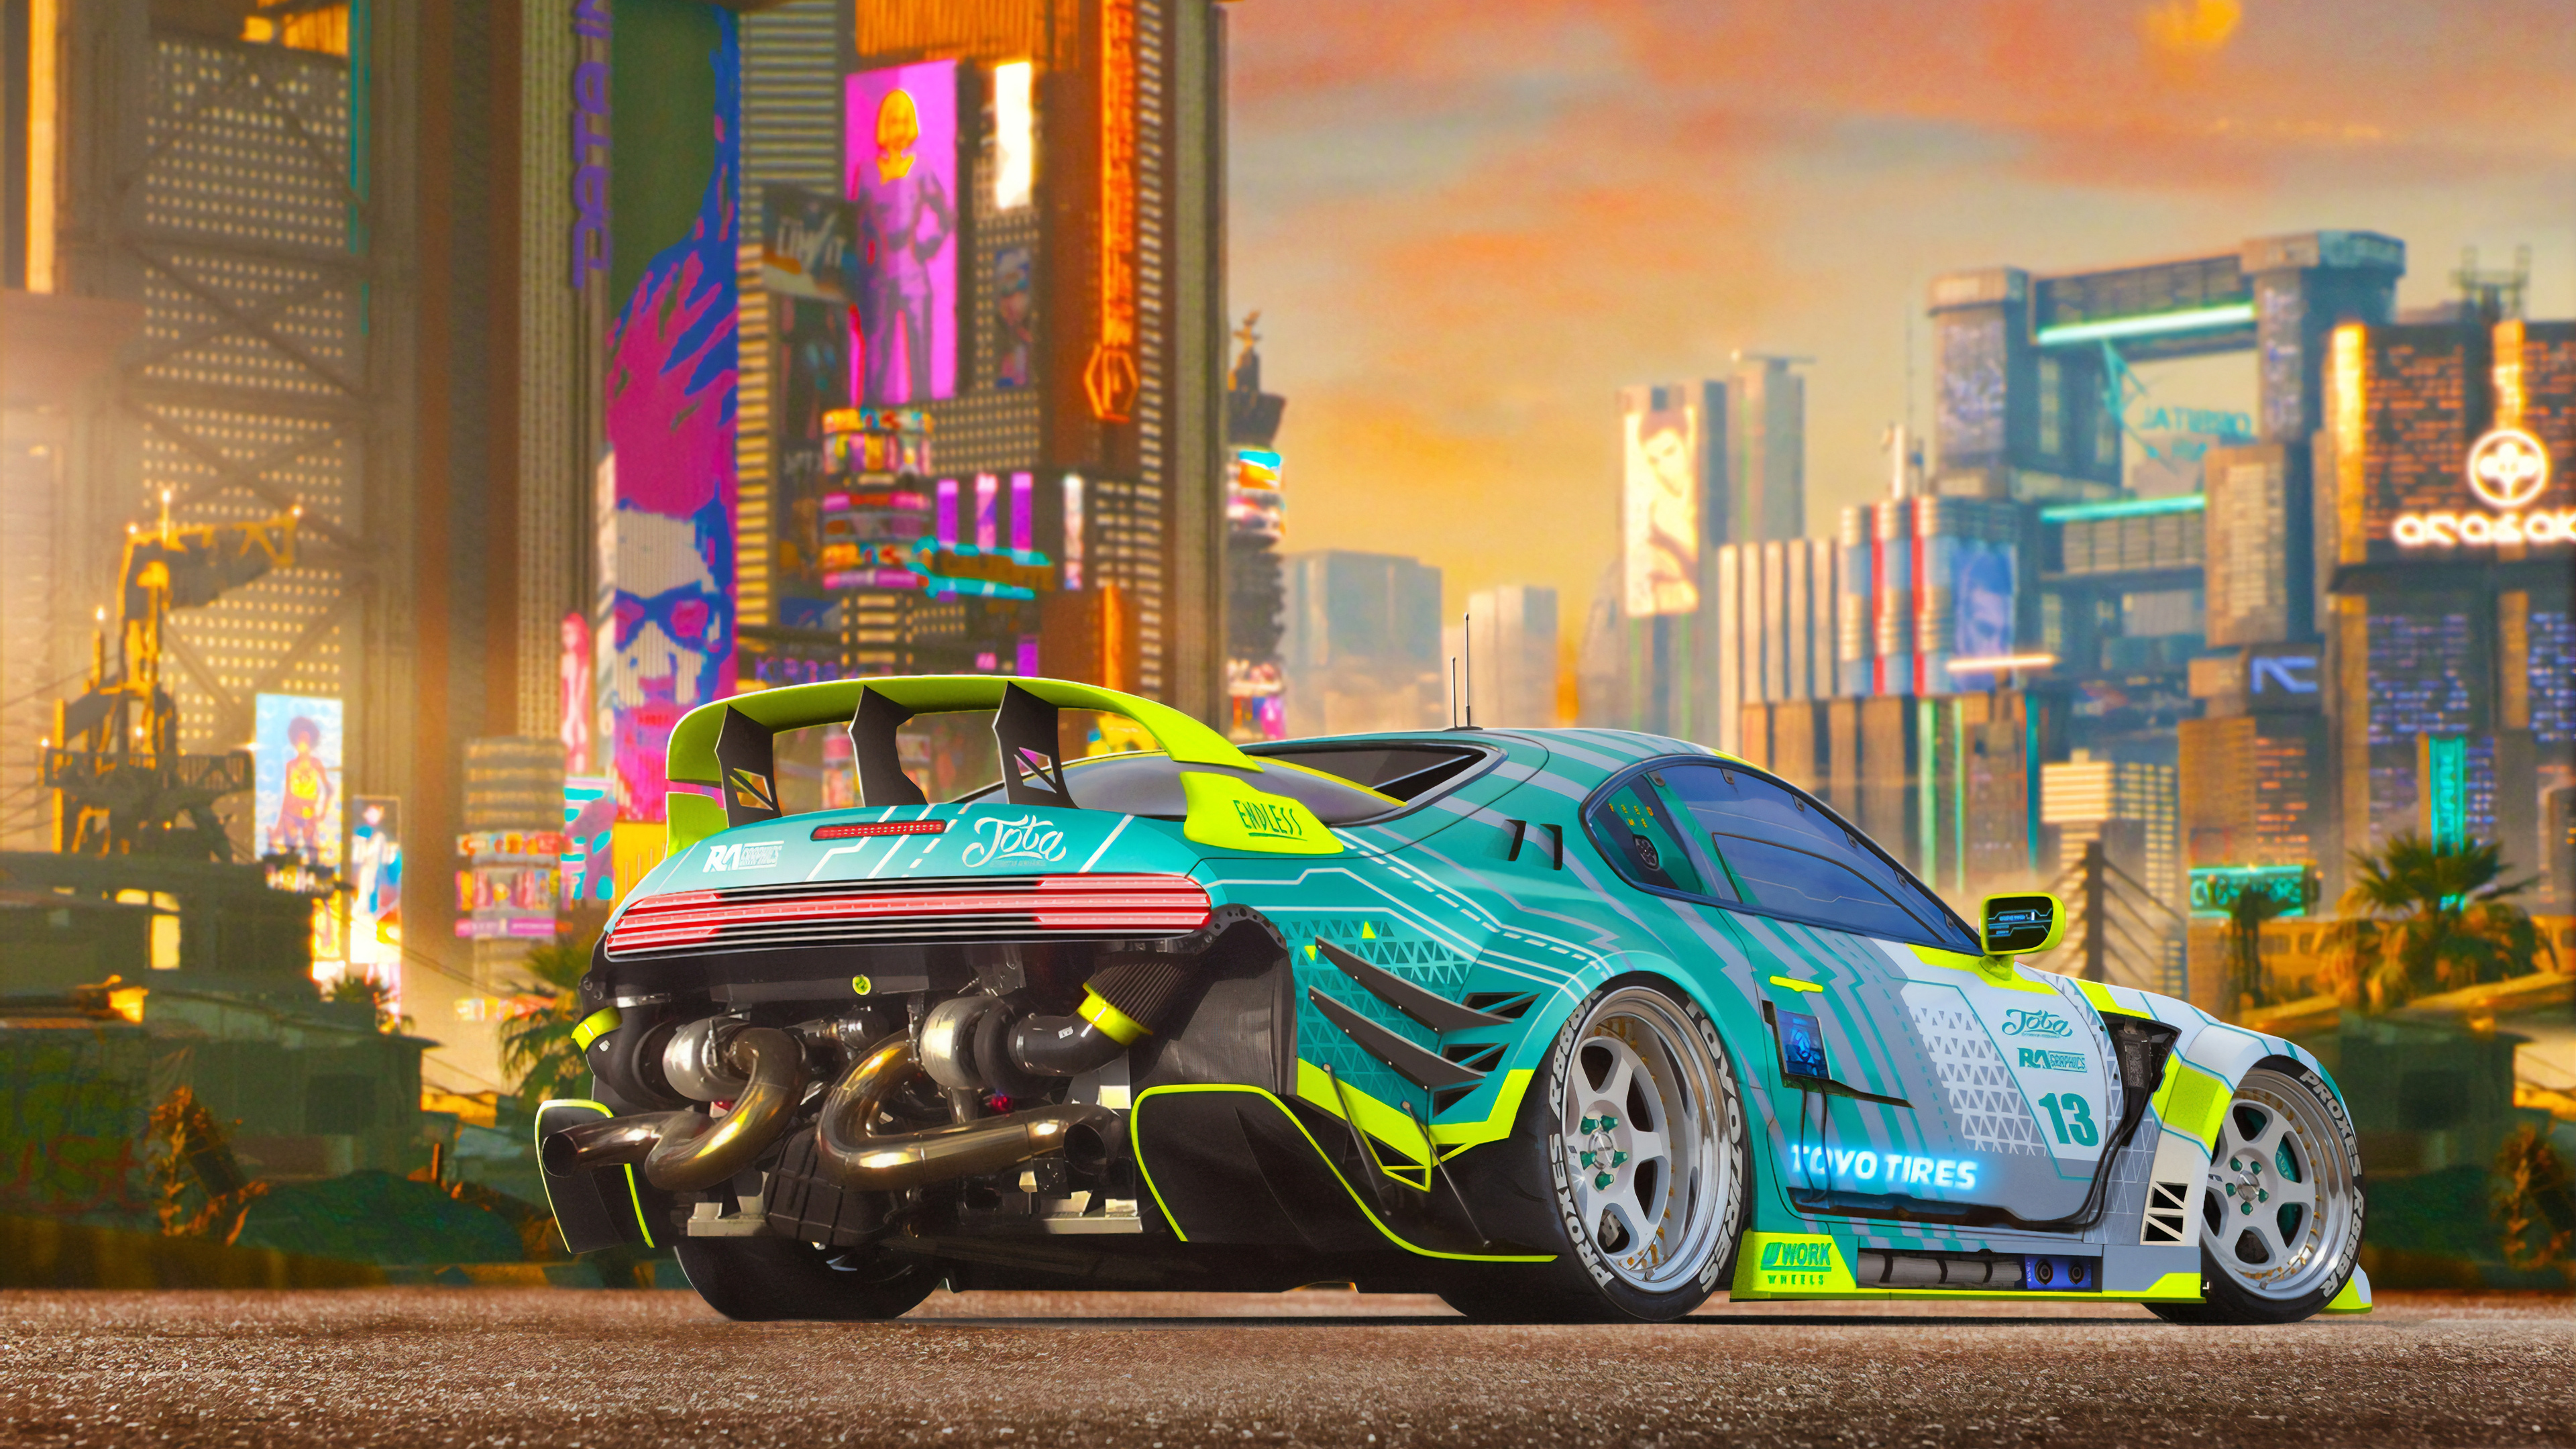 3840x2160 Cyberpunk Car 4k 4k HD 4k Wallpapers, Images, Backgrounds, Photos  and Pictures